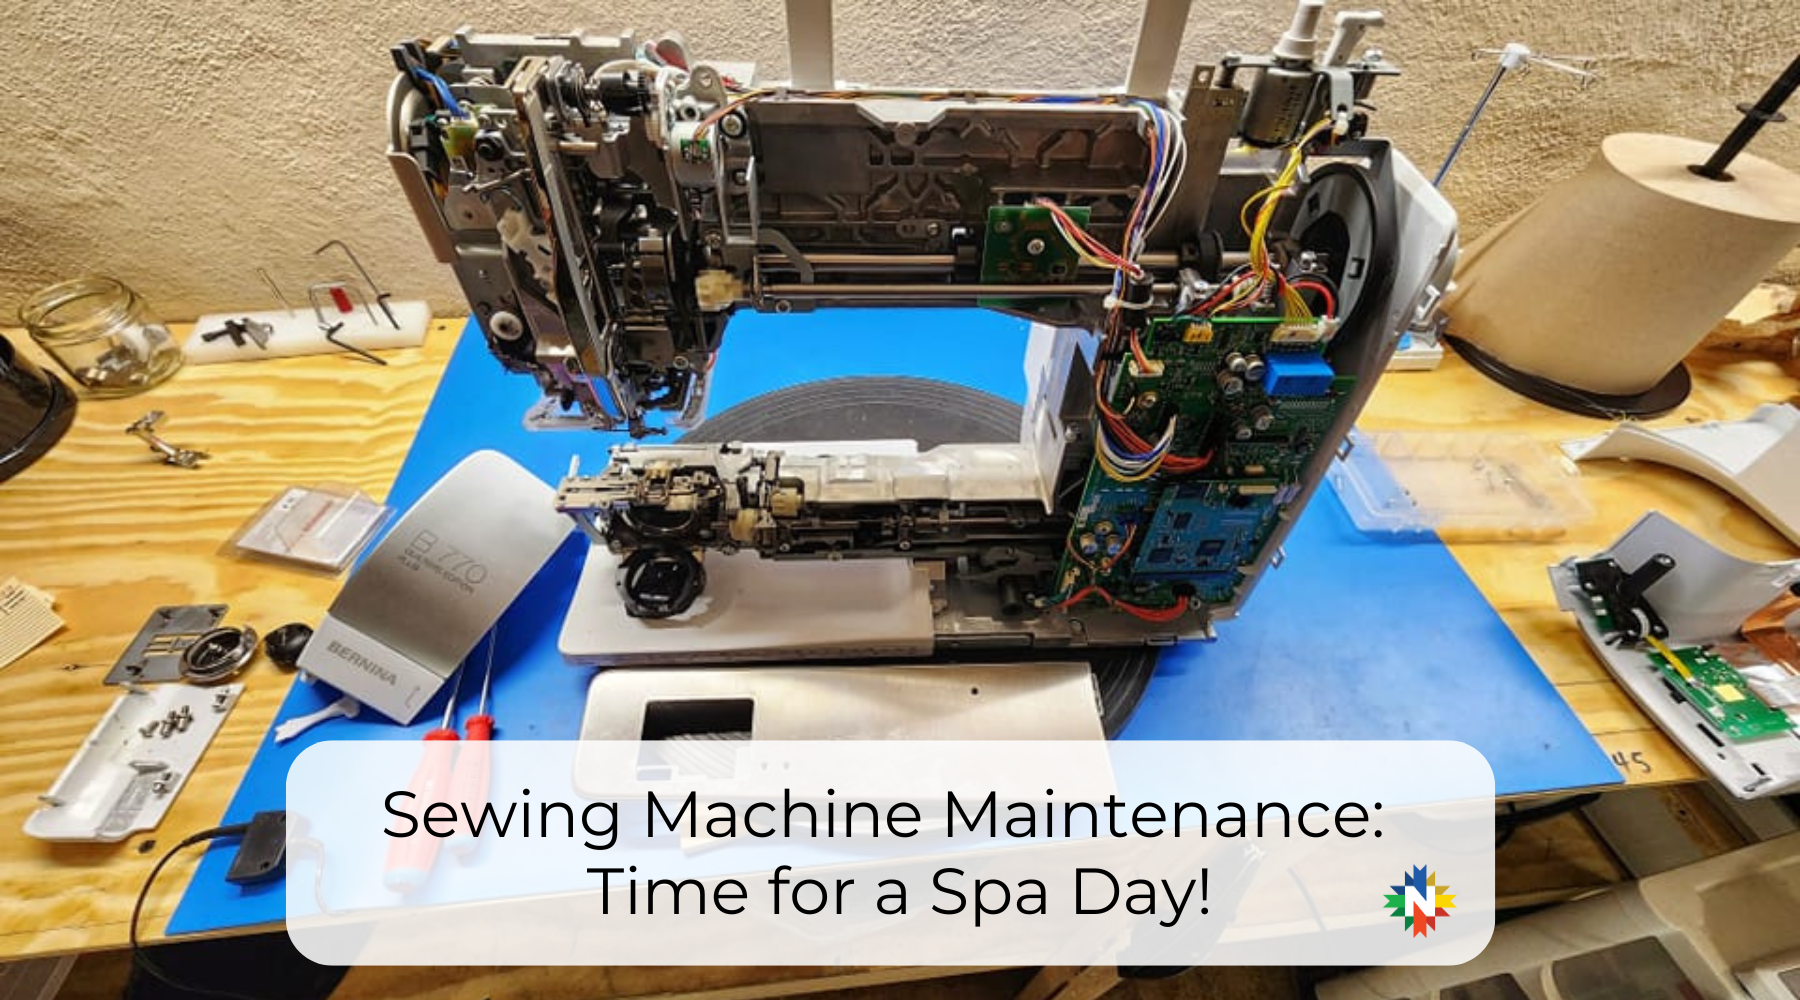 Sewing Machine Annual Maintenance: Time for a Spa Day for your Sewing Machine!